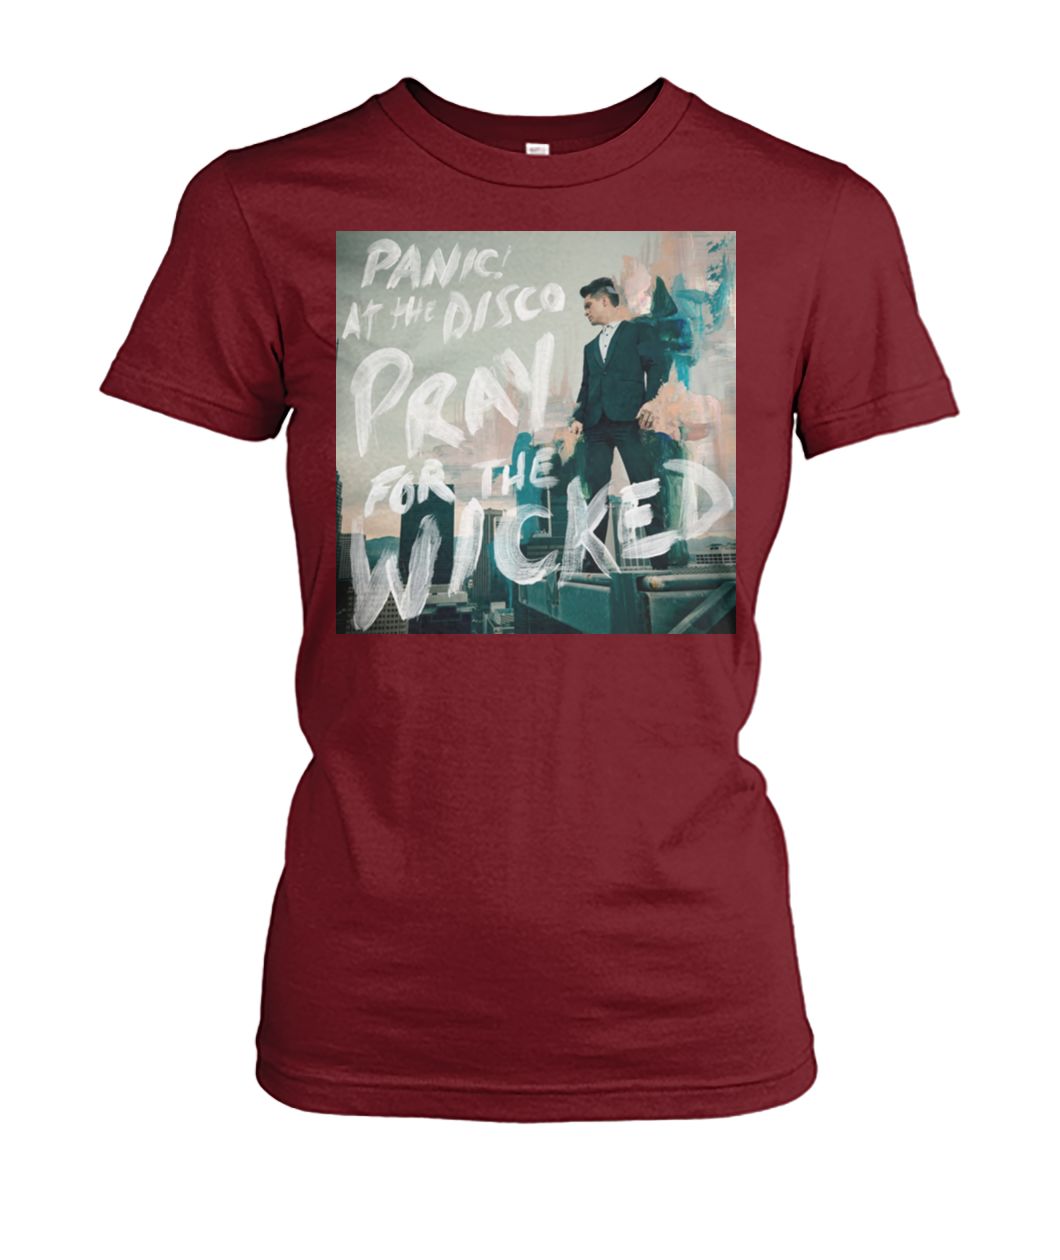 Panic at the disco pray for the wicked women's crew tee